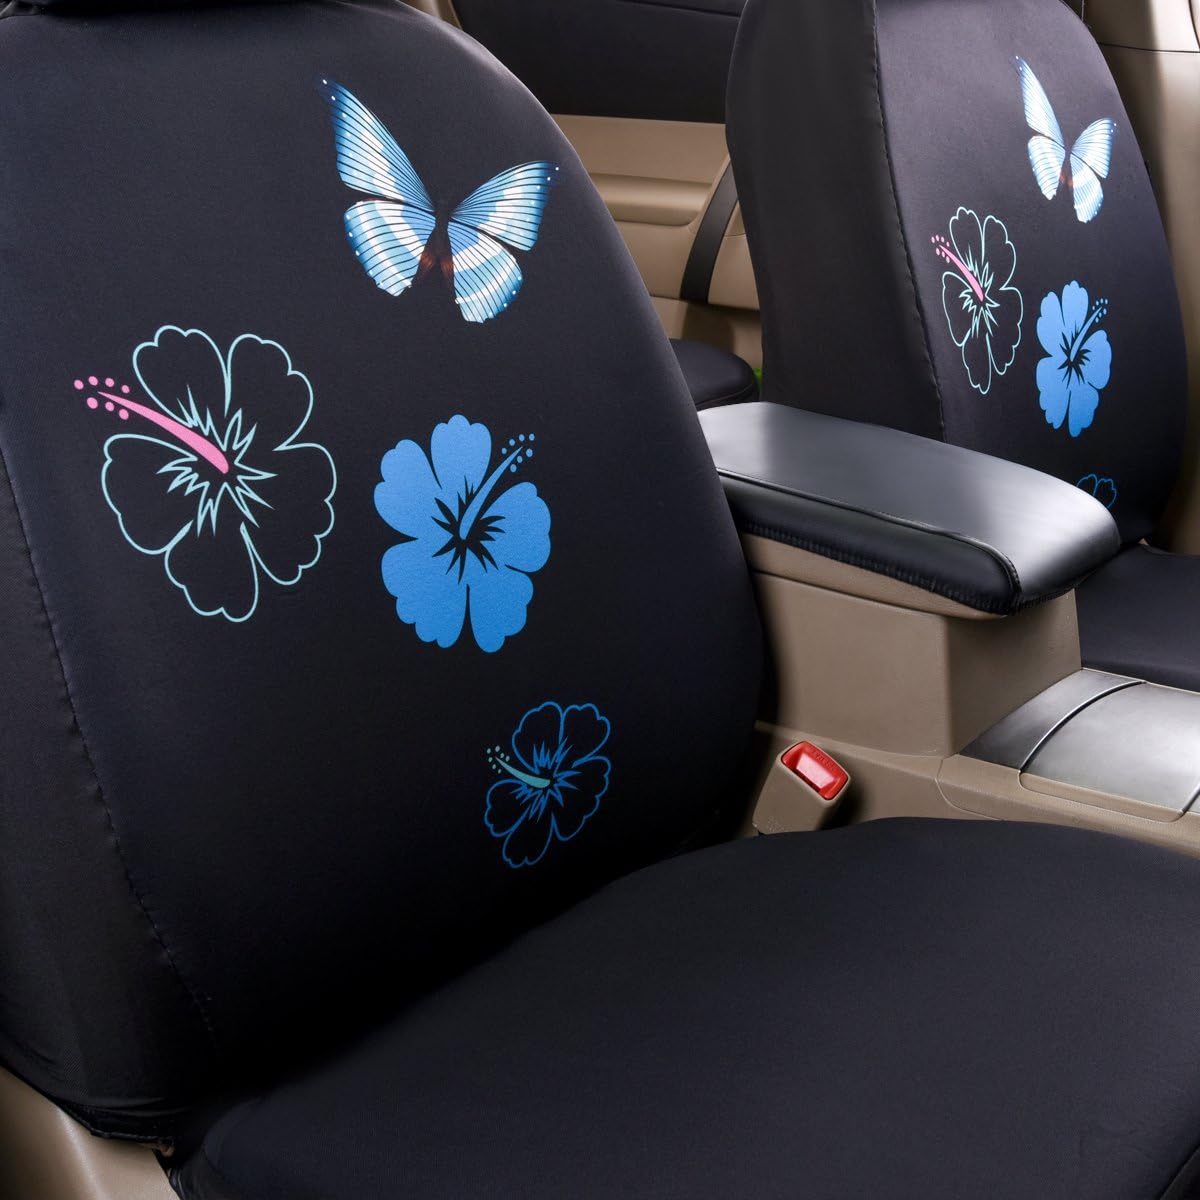 CAR PASS Unversial Flower and Butterfly Car Floor Mats and Car Seat Cover, for Cute Girly Women,Airbag Compatible,Fit for SUV,Sedans,Vans